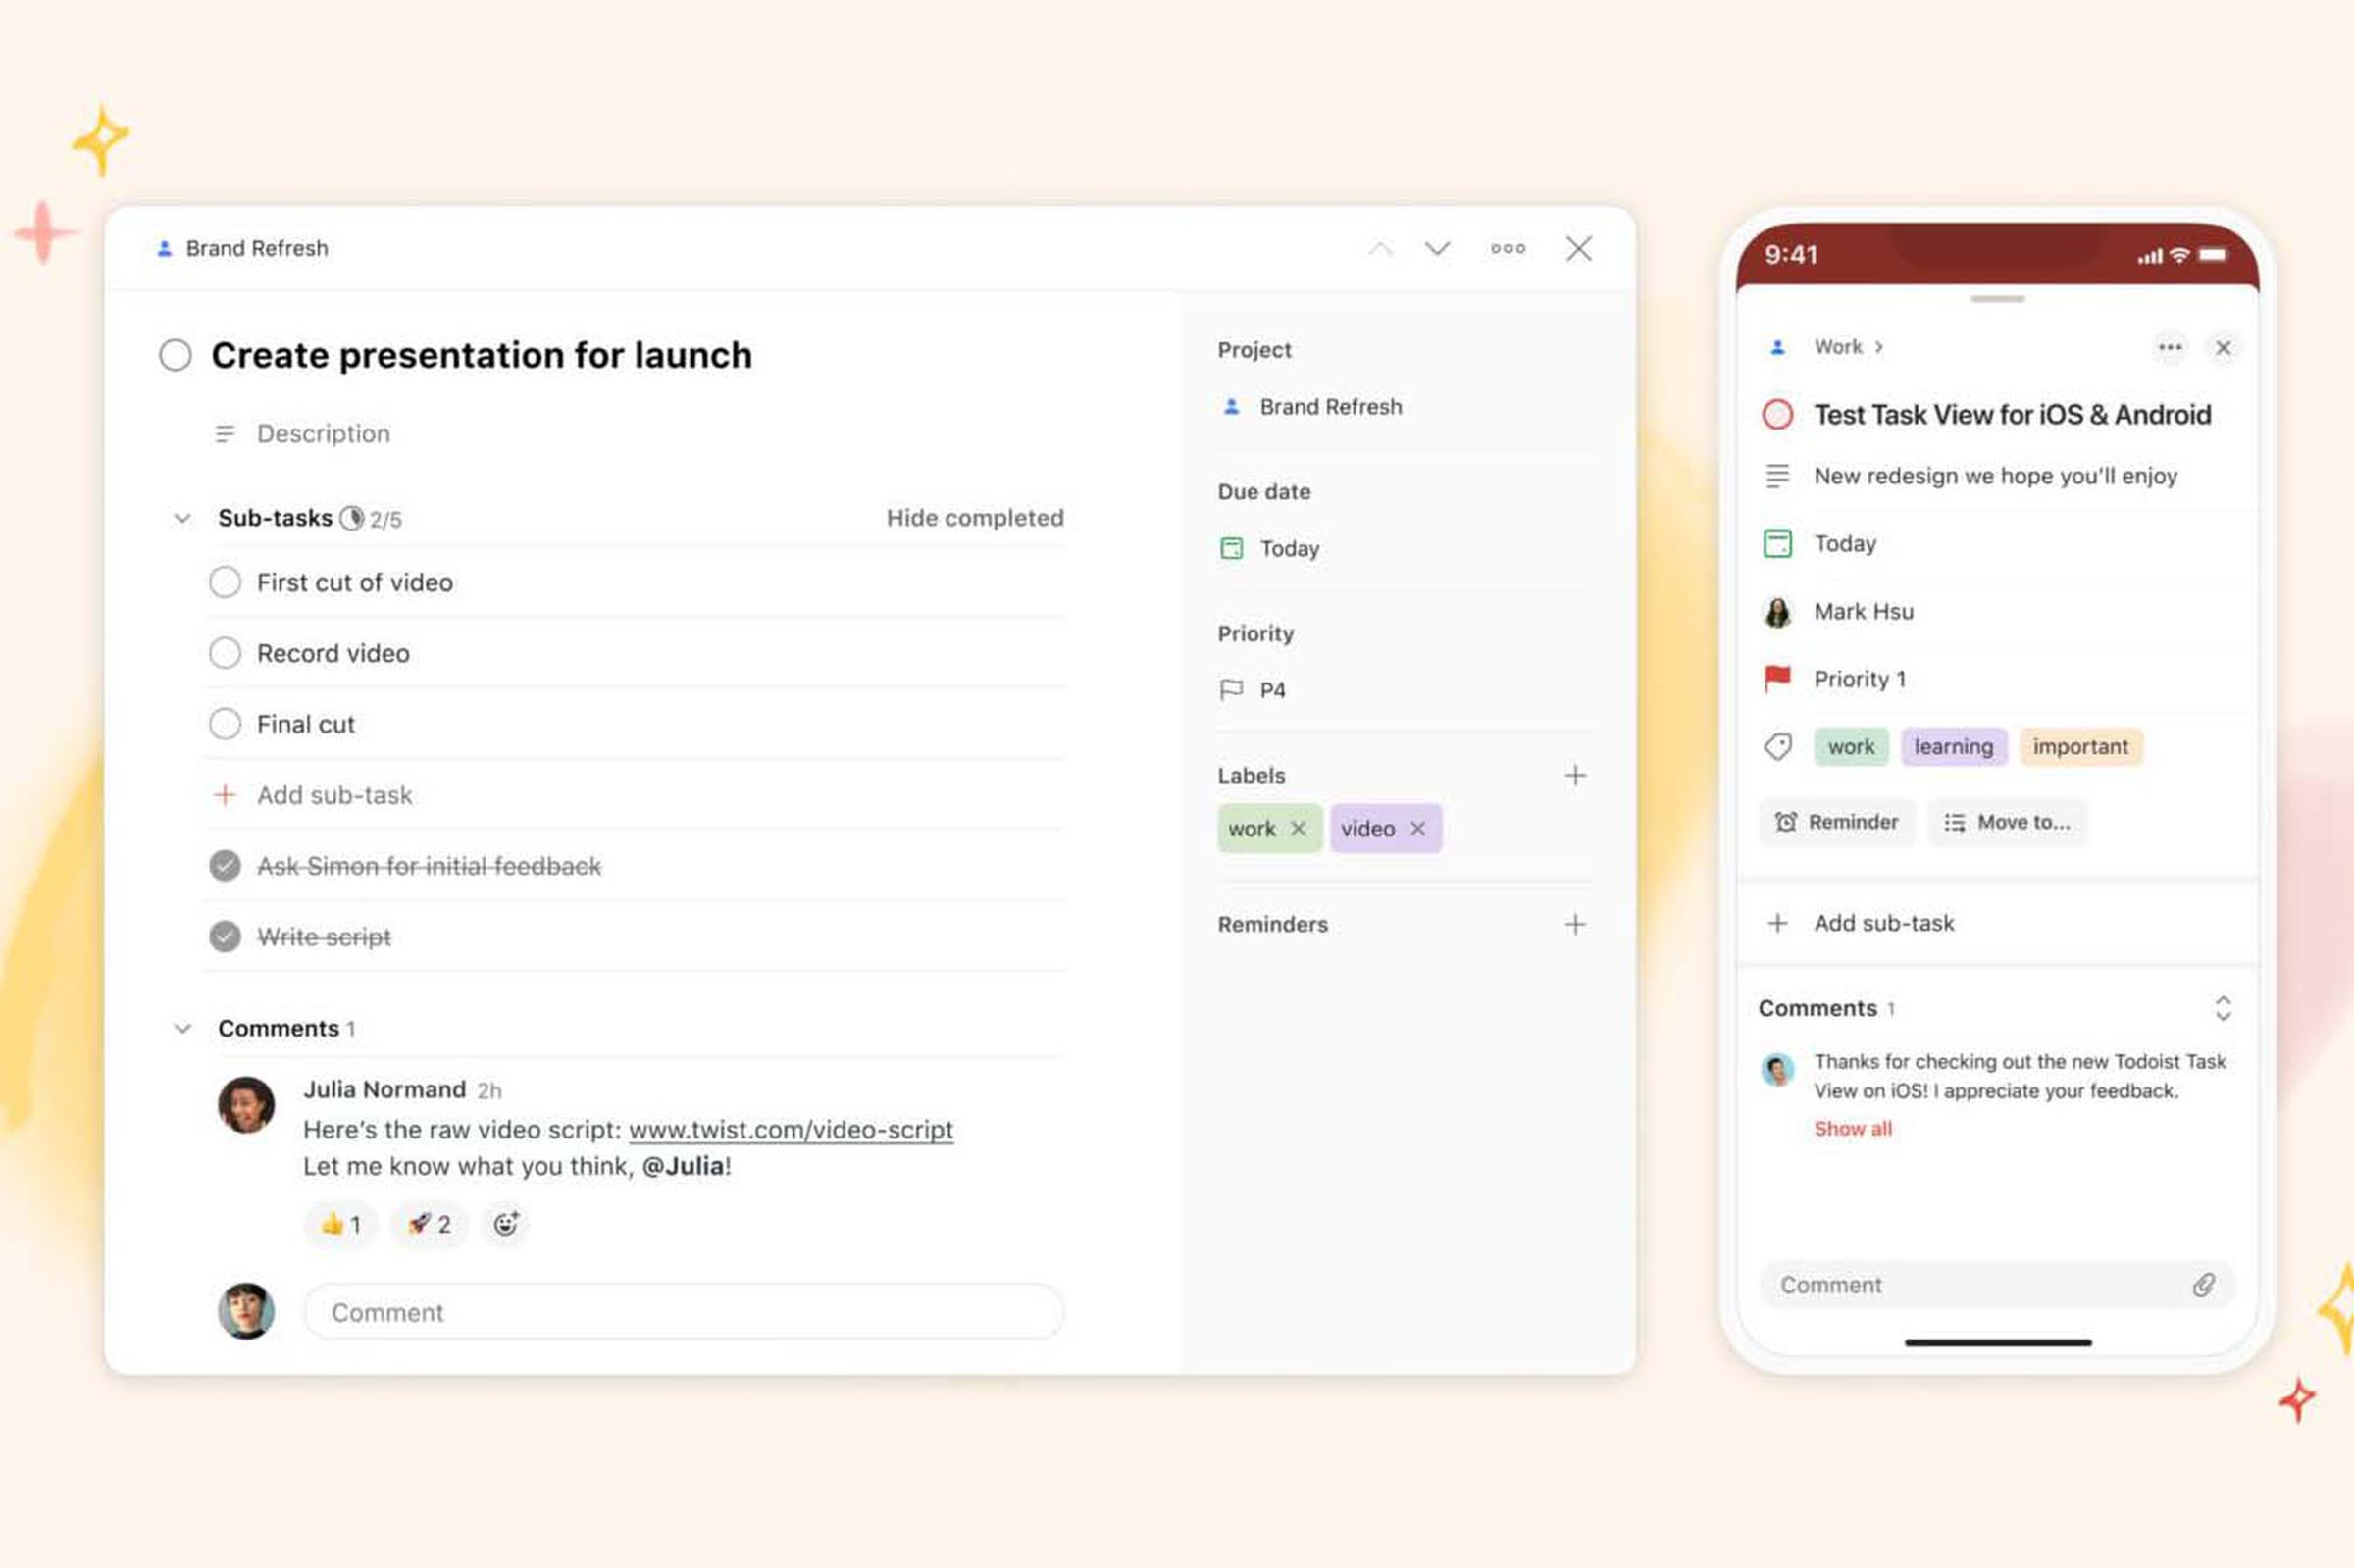 Screenshots of Todoist's desktop and mobile interfaces.